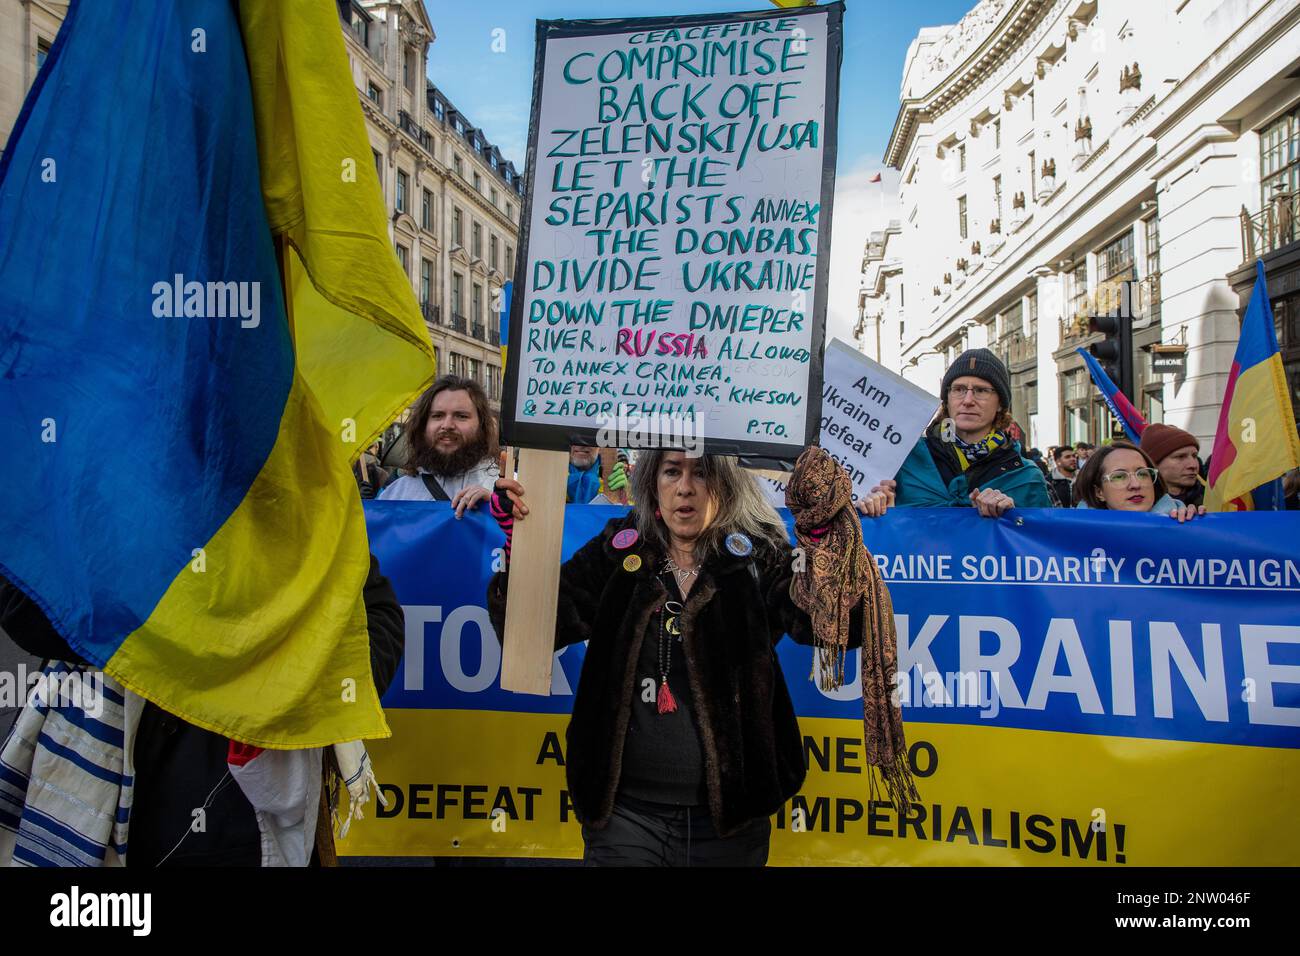 London, UK. 25th February, 2023. A woman holds a sign in front of supporters of Ukraine Solidarity Campaign staging a counter-protest to a march by Stop The War Coalition (StWC) and the Campaign for Nuclear Disarmament (CND) calling for a ceasefire and negotiated settlement in Ukraine. The counter-protest was joined by human rights and LGBT+ activist Peter Tatchell. Credit: Mark Kerrison/Alamy Live News Stock Photo